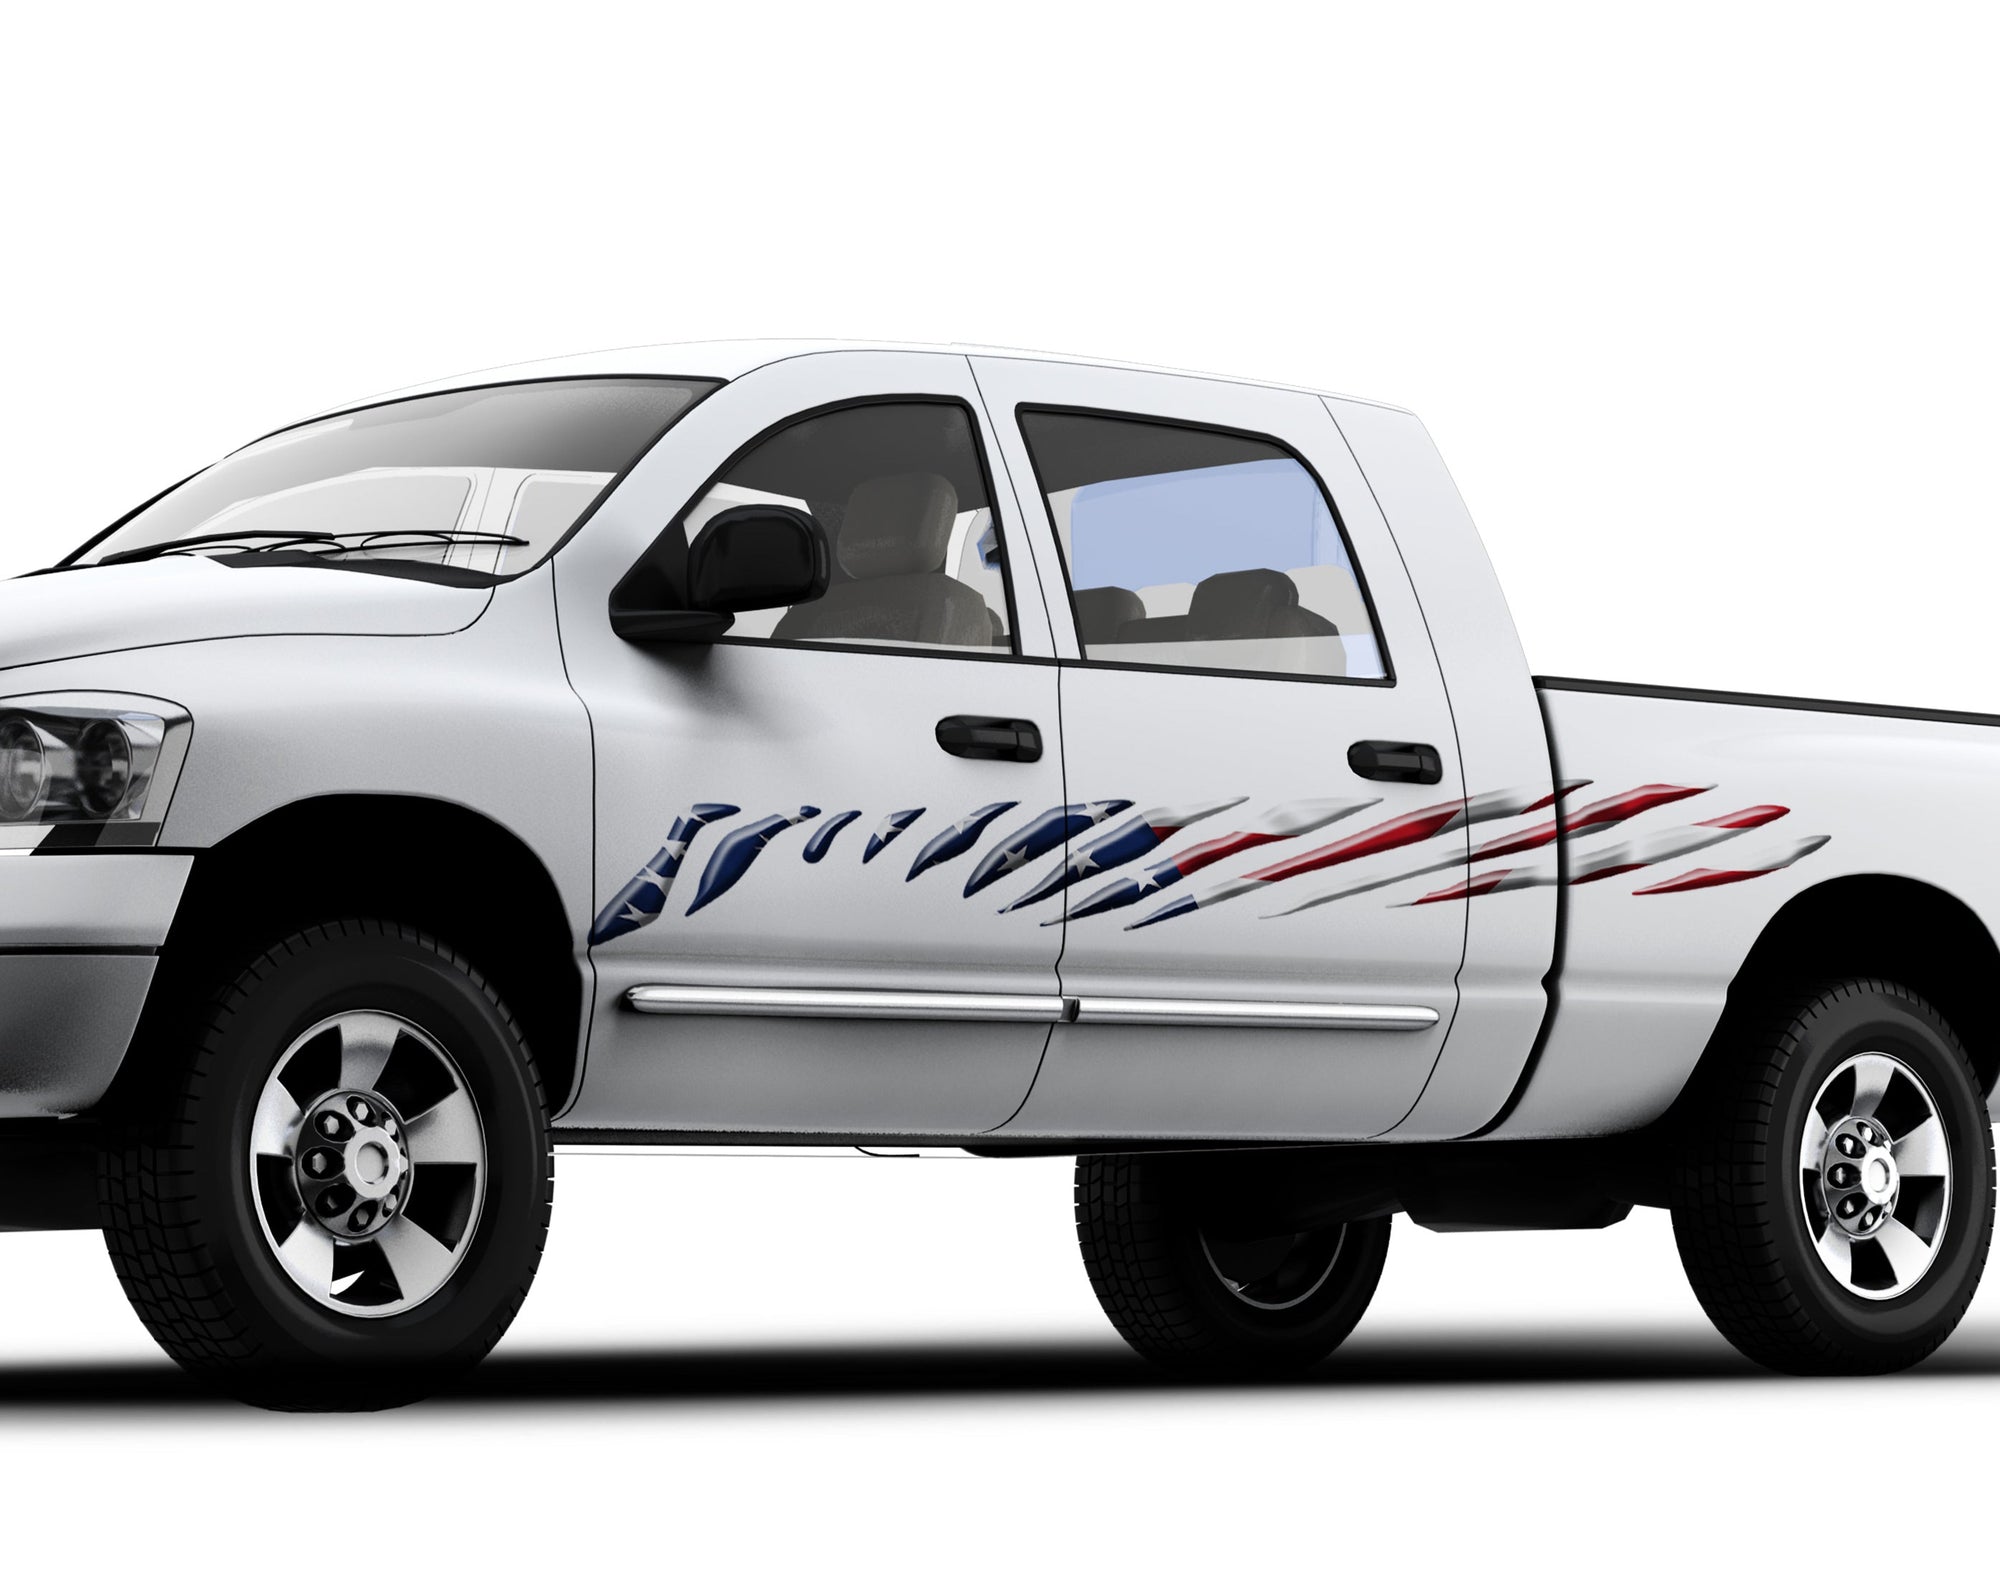 american flag stripes on the side of white pickup truck 